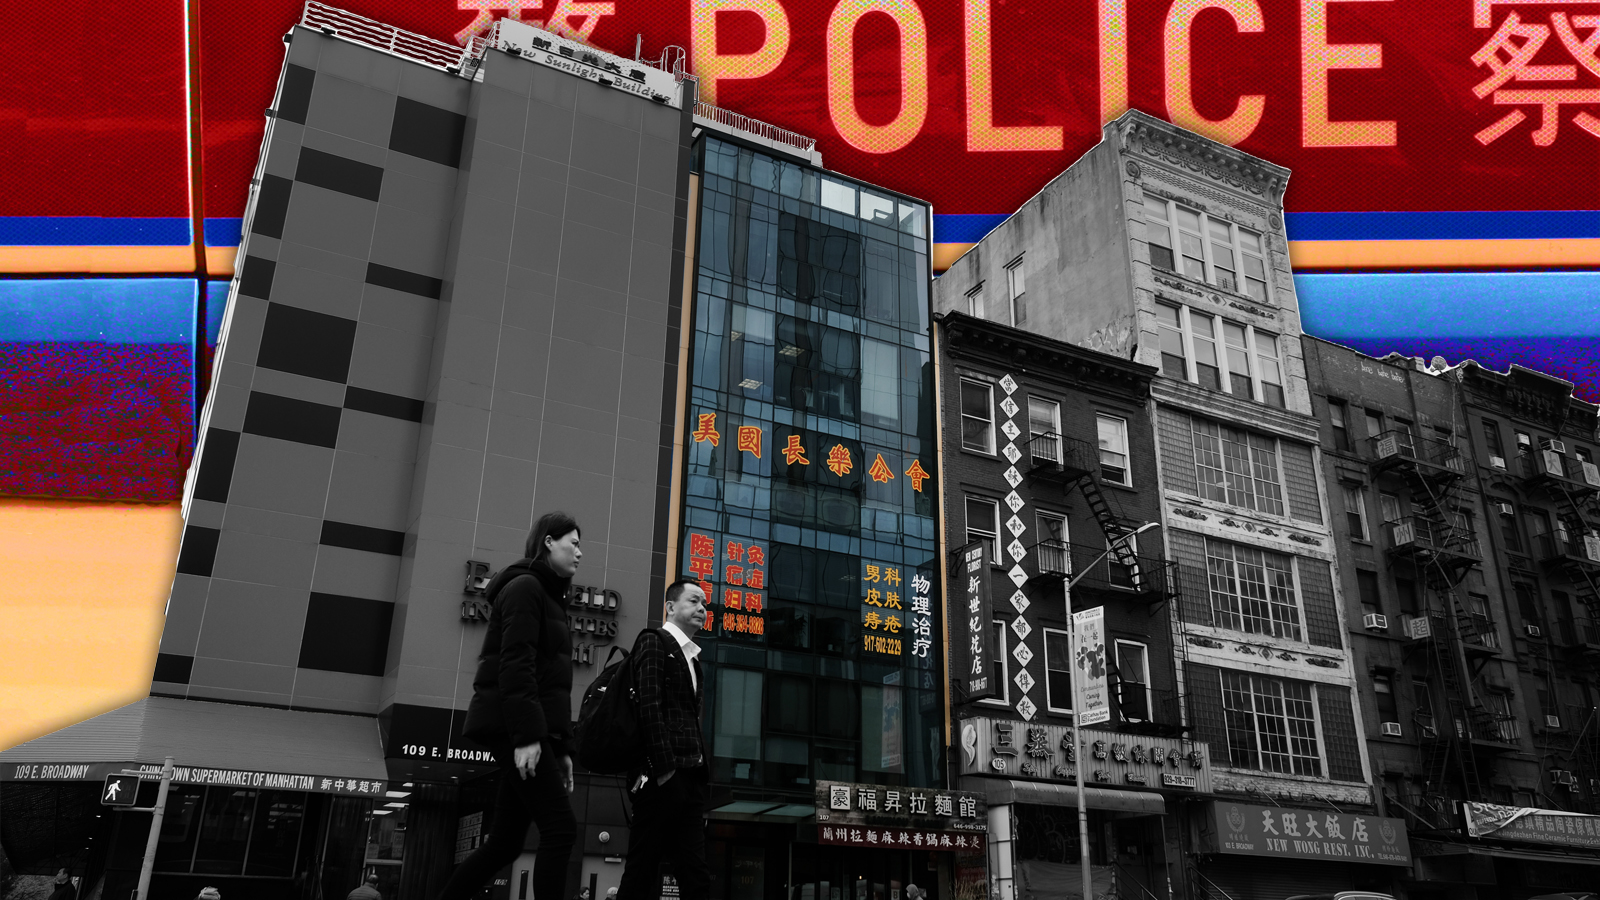 Secret police station in Chinatown.